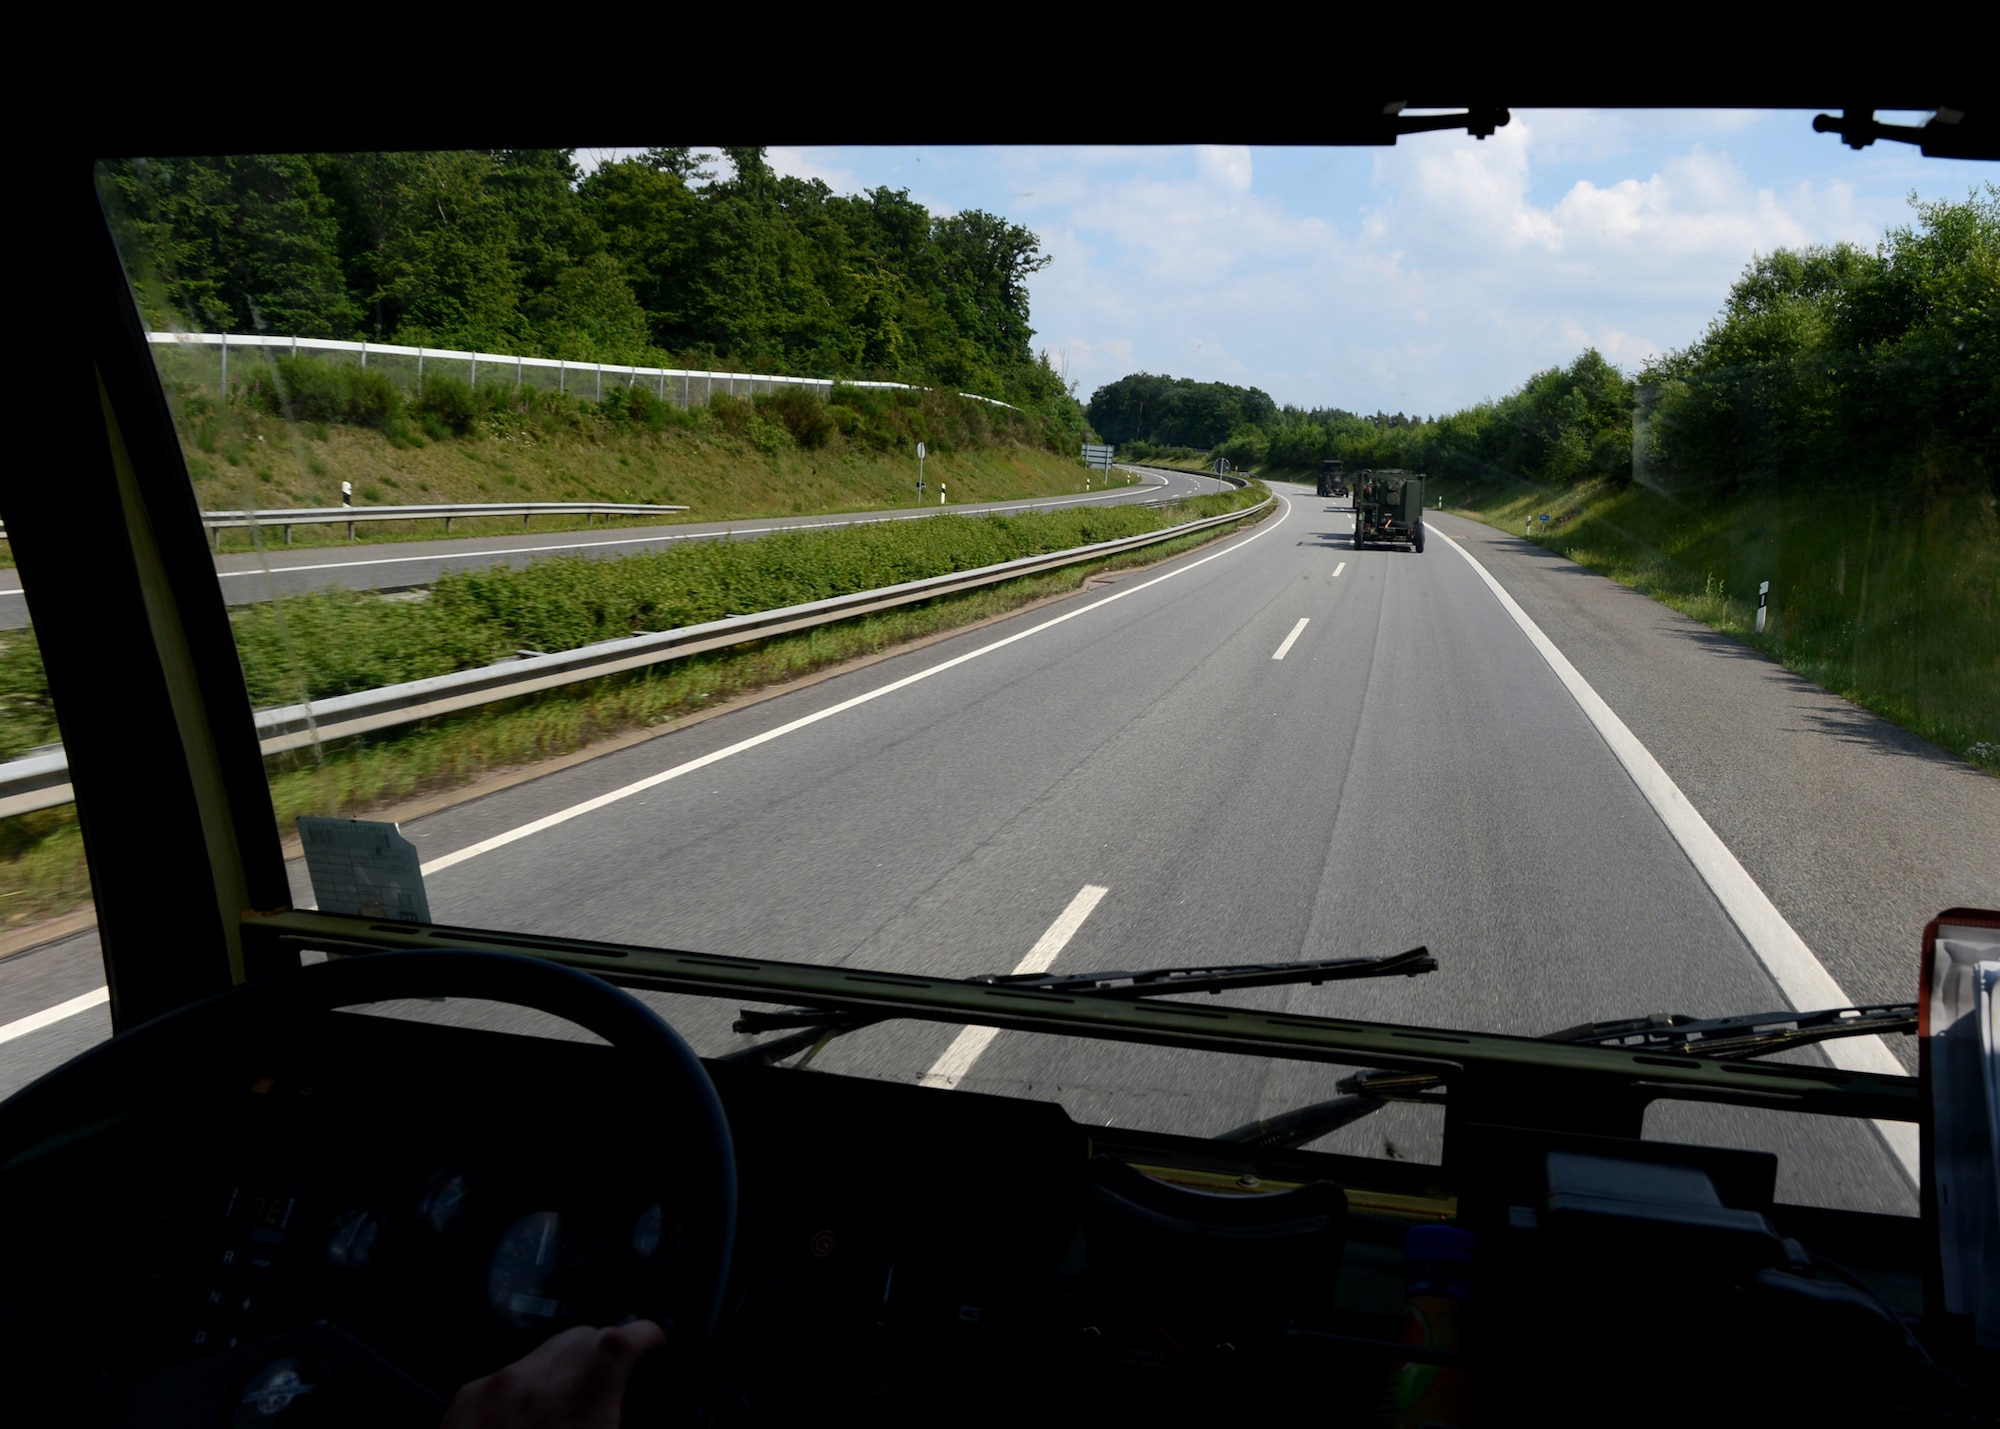 A U.S. Air Force convoy drives on the autobahn in Germany toward Poland to provide air control for NATO air assets participating in various military training events, June 2, 2014. The 606th Air Control Squadron, Spangdahlem Air Base, Germany, is supporting the Polish-led Exercise EAGLE TALON and U.S. Aviation Detachment Rotation 14-3. Poland and U.S. share a strong military partnership and train together to increase readiness in support for NATO operations. (U.S. Air Force photo by Airman 1st Class Kyle Gese/Released)